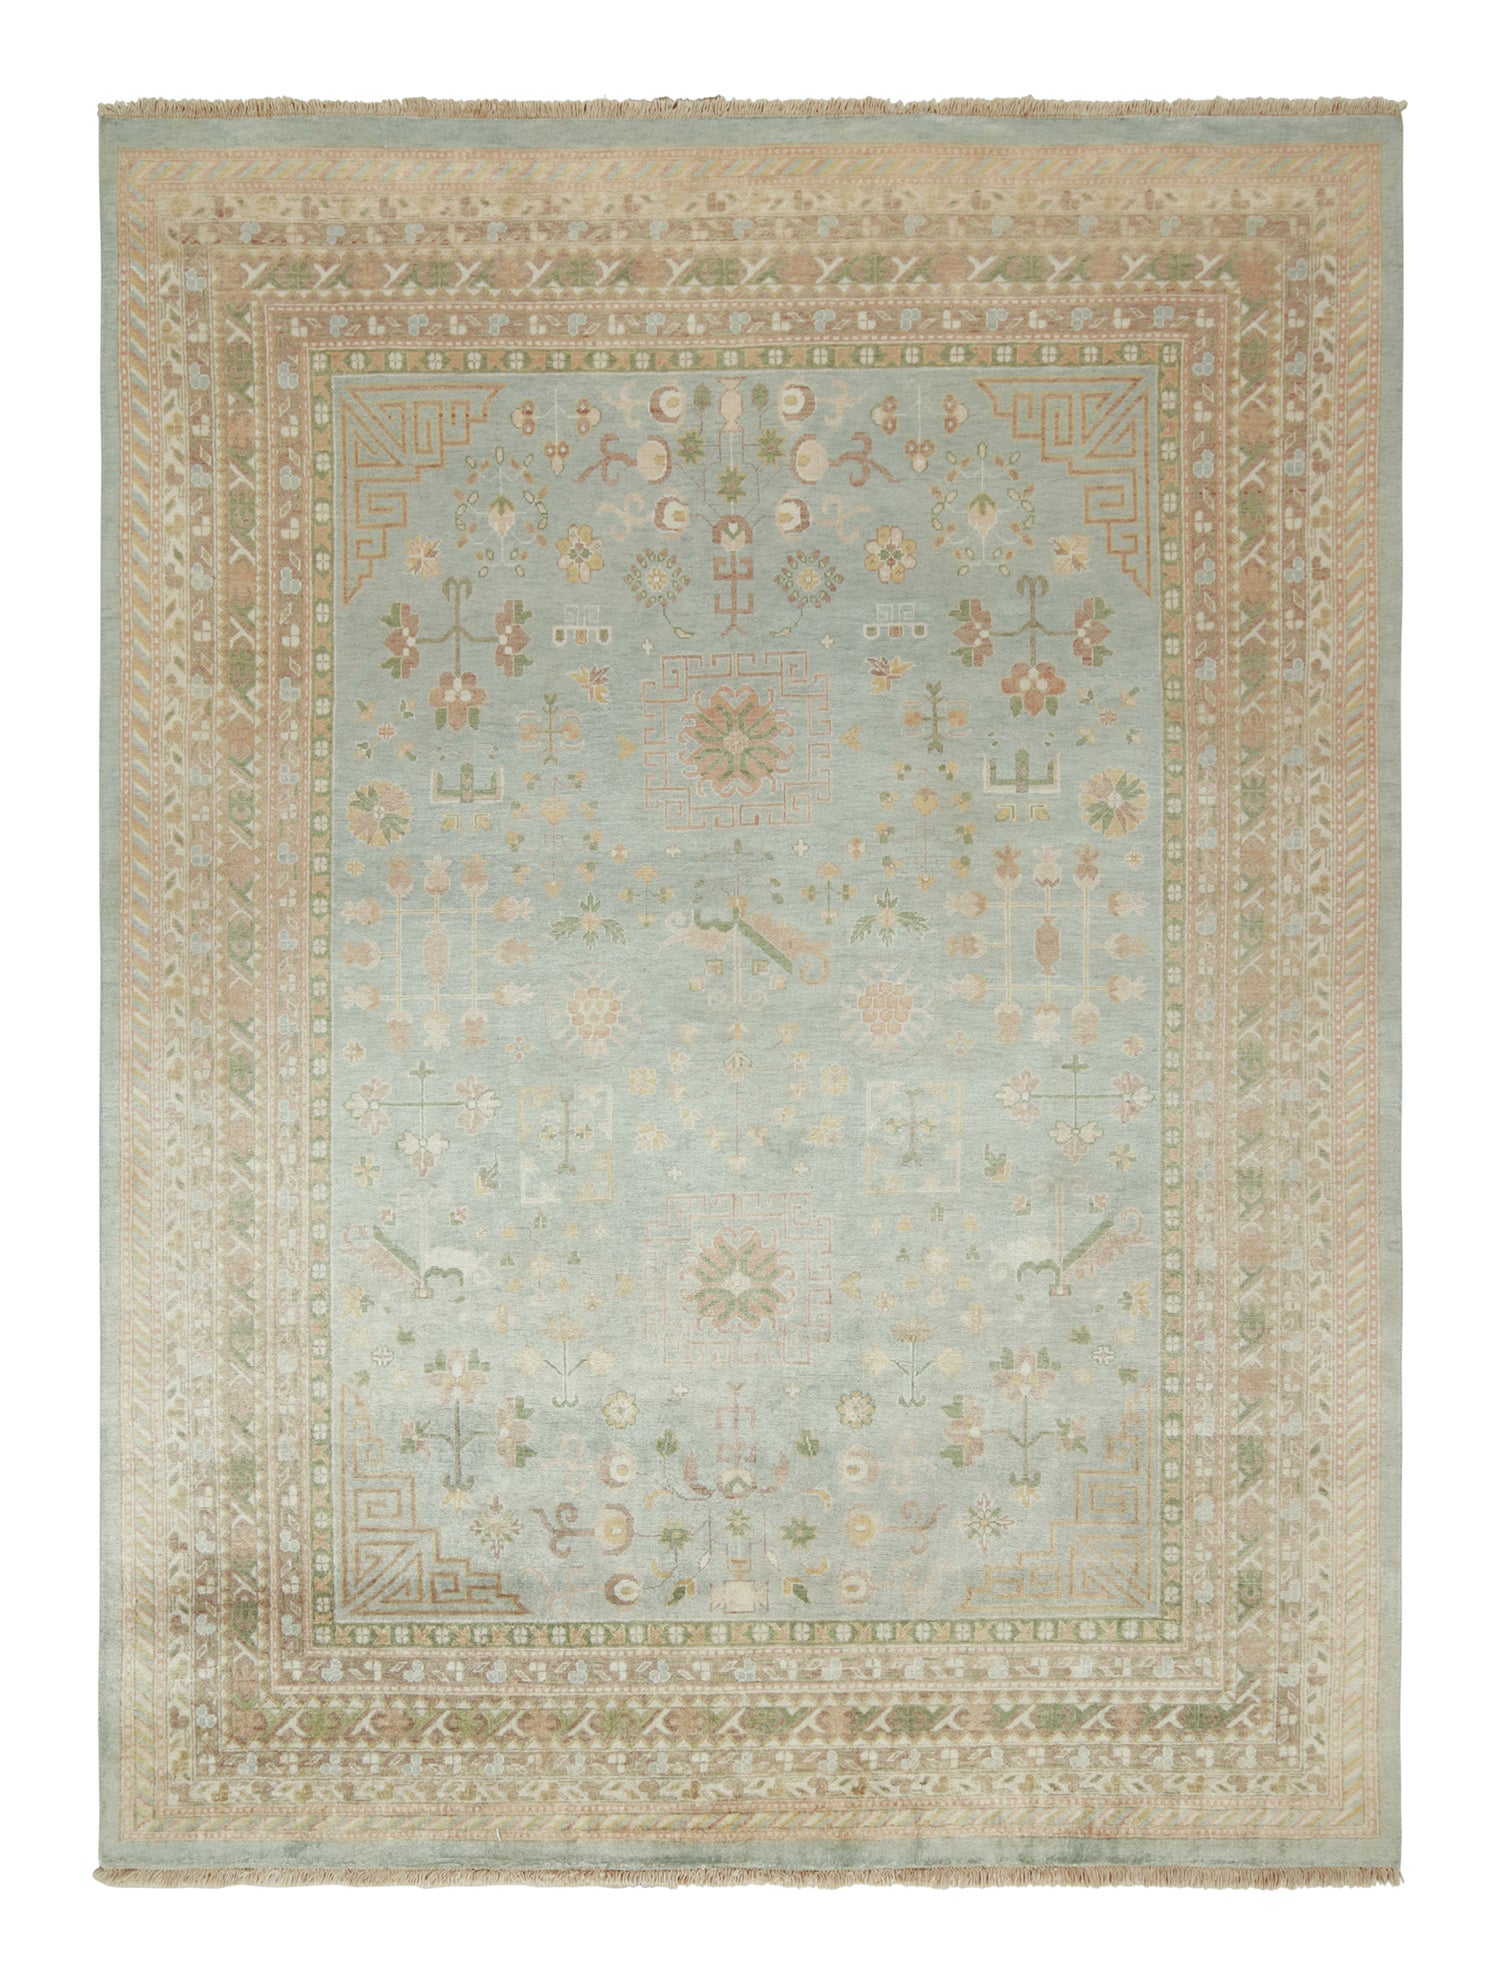 Rug & Kilim’s Khotan Style Rug with Blue, Gold and Green Floral Pattern